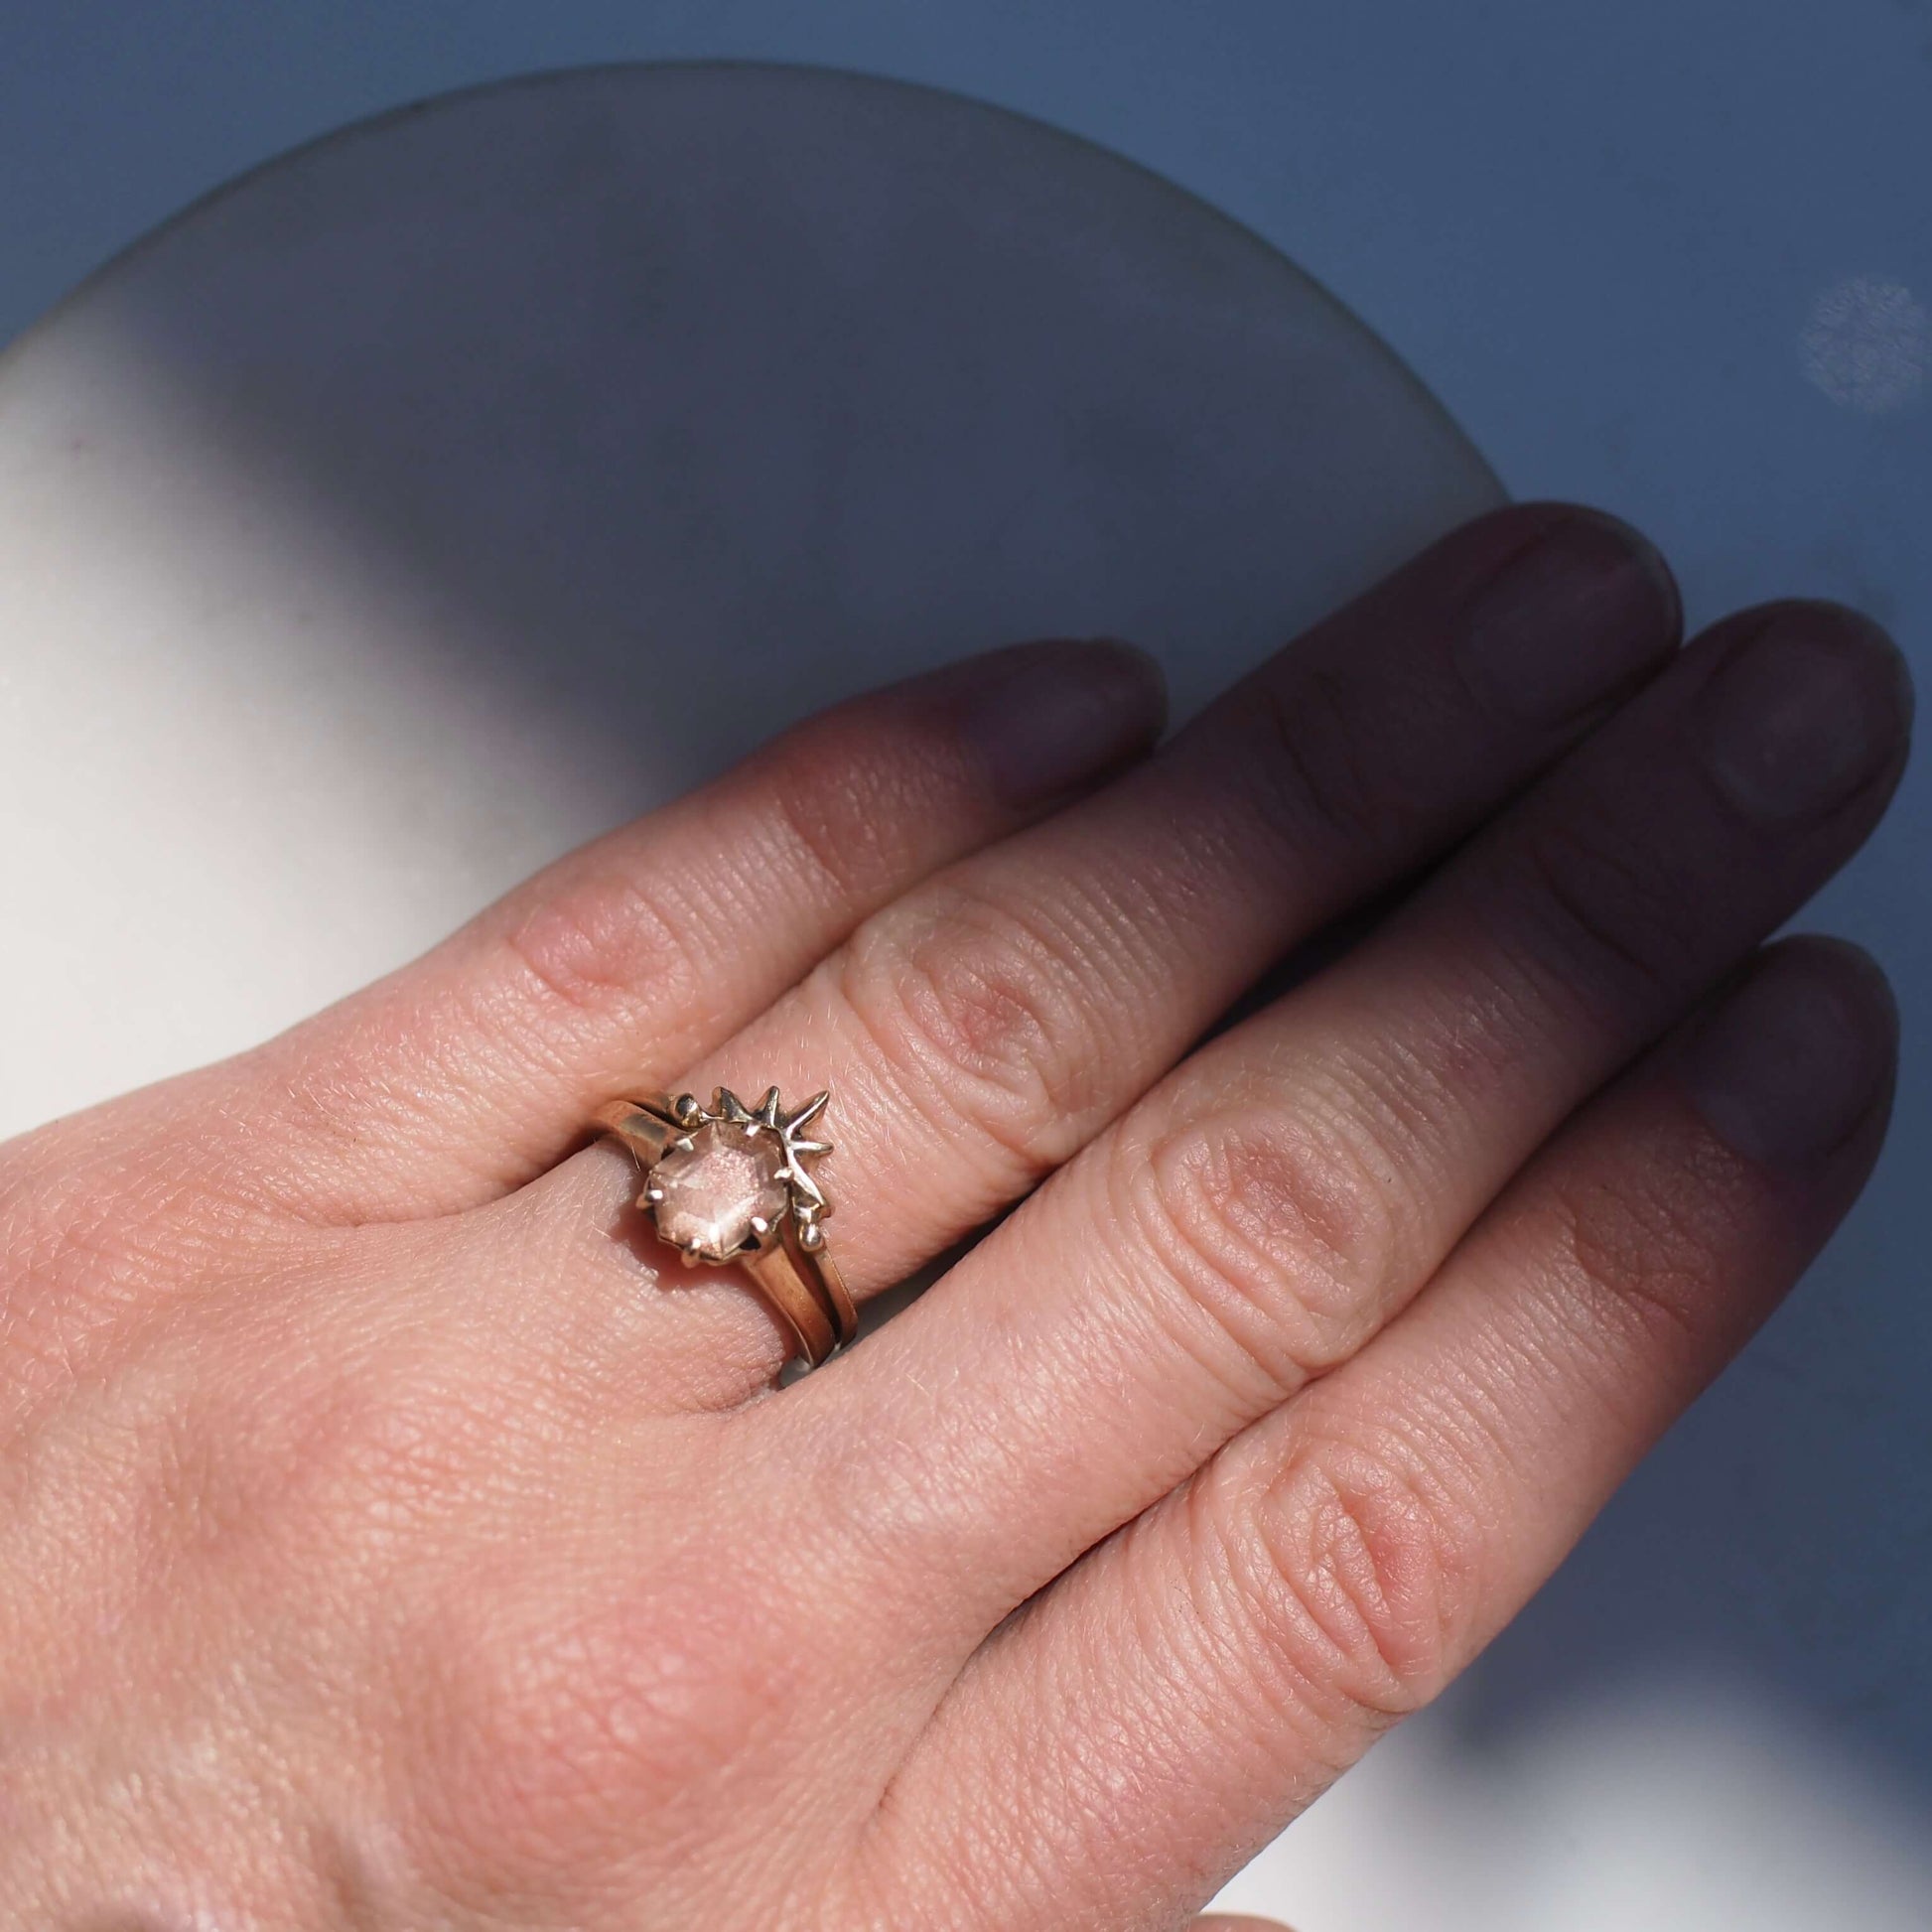 Sunstone Engagement Ring stacked with a Sunburst nesting band, sustainably mined jewelry handmade by Iron Oxide Designs. Shown on a model's hand for scale